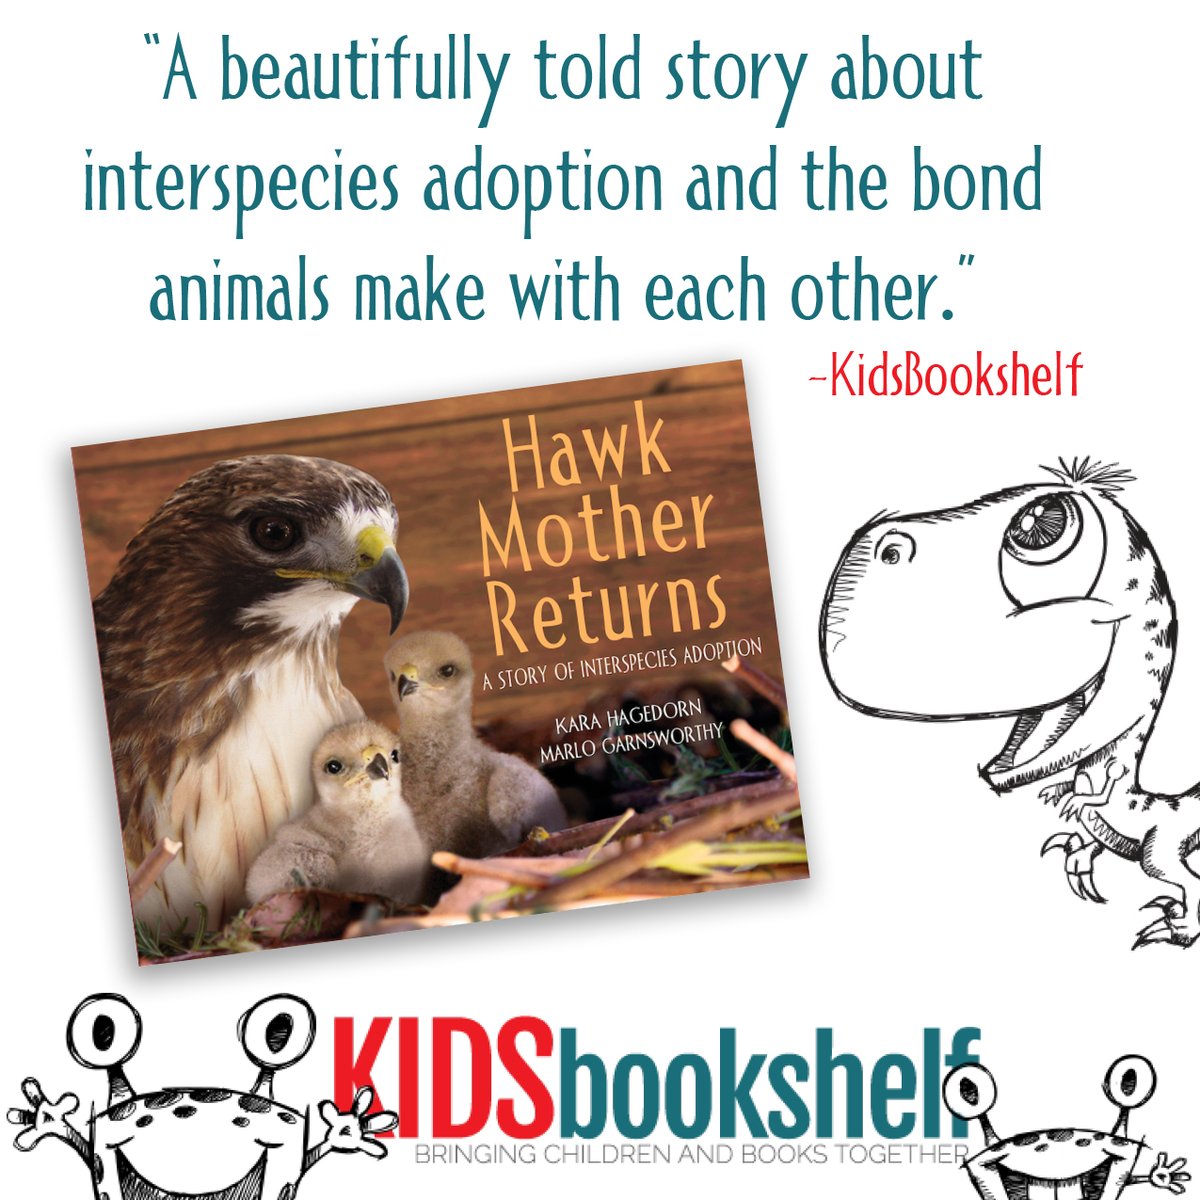 A new review, just came in! Thank you KidsBookShelf!
Read the review for HAWK MOTHER RETURNS by Kara Hagedorn and @MarloWordyBird here: kidsbookshelf.com/reviews/hawk-m… @P_G_W